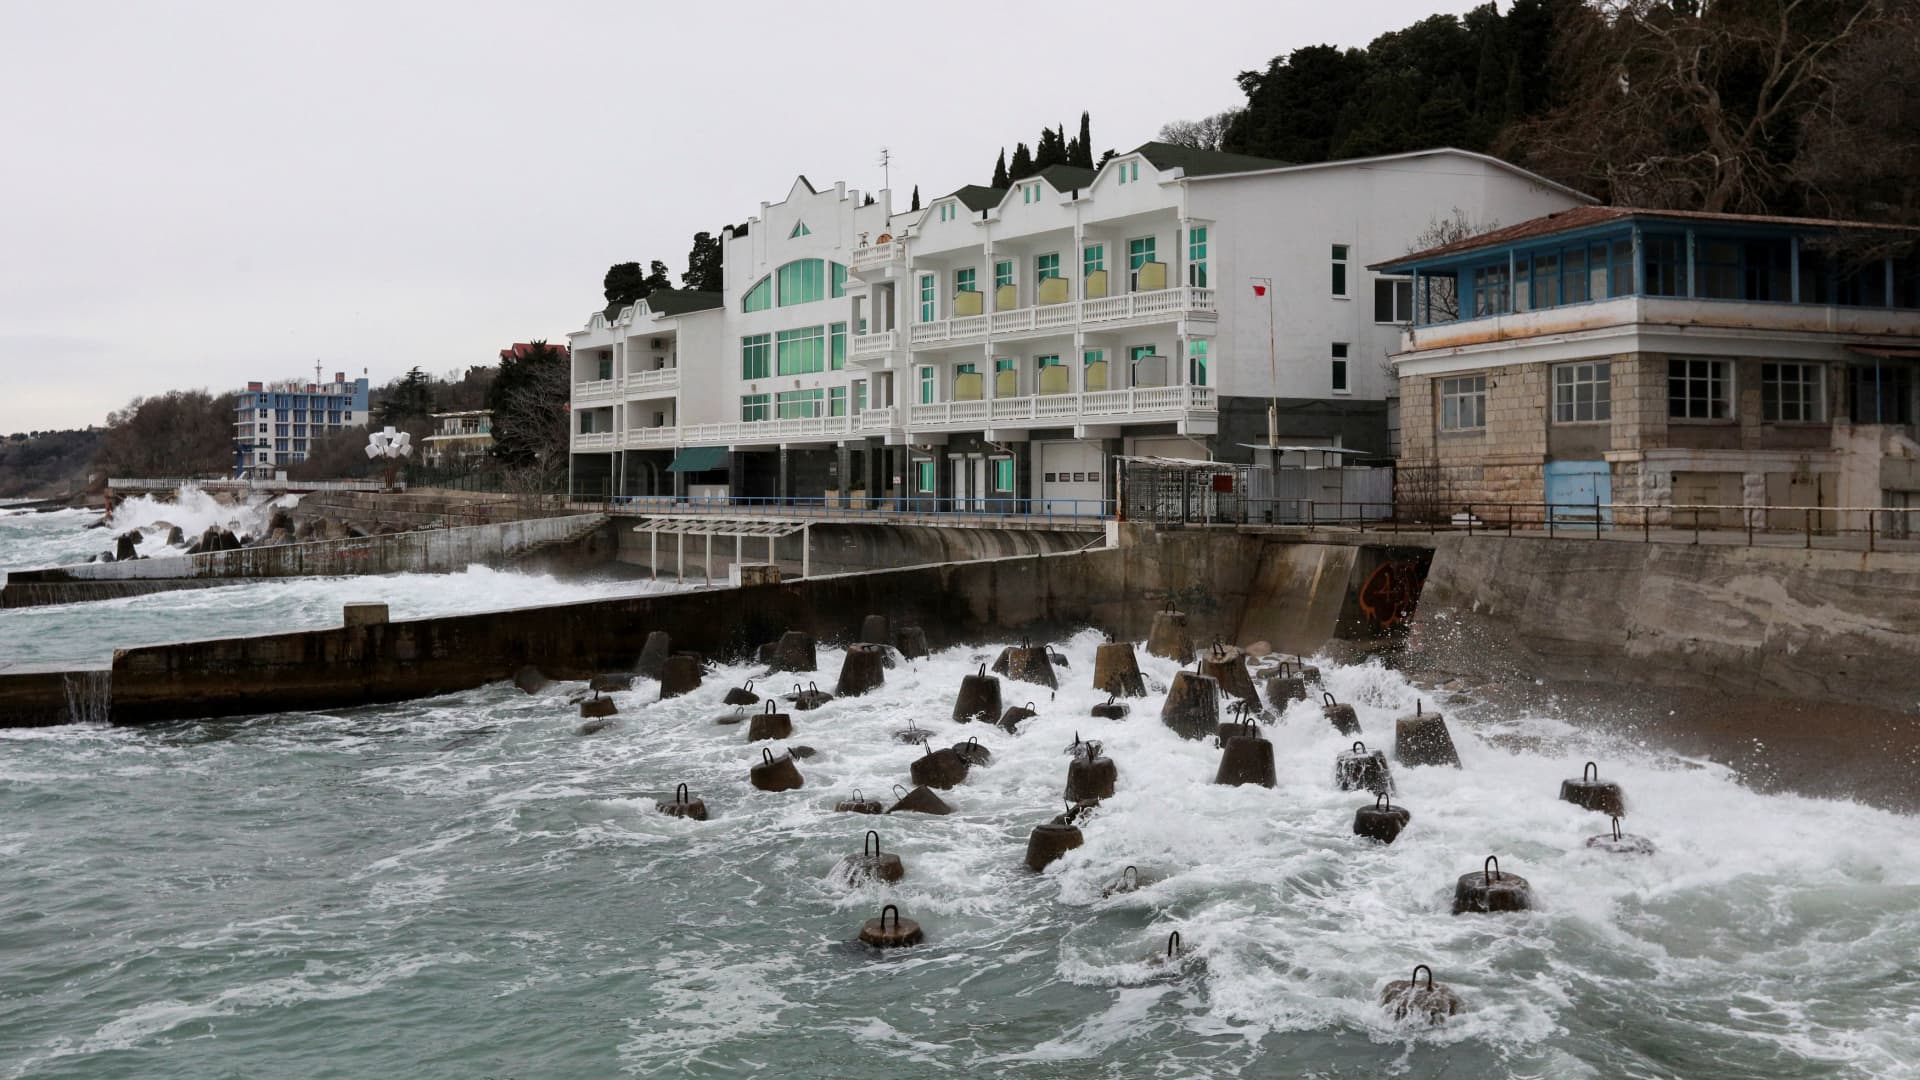 The hotel Gornoye Solntse, reportedly one of around 500 properties in the Crimean peninsula, including some belonging to senior Ukrainian politicians and business figures that were nationalized by local Russian-installed authorities, in Alupka, Crimea, on Feb. 8, 2023.